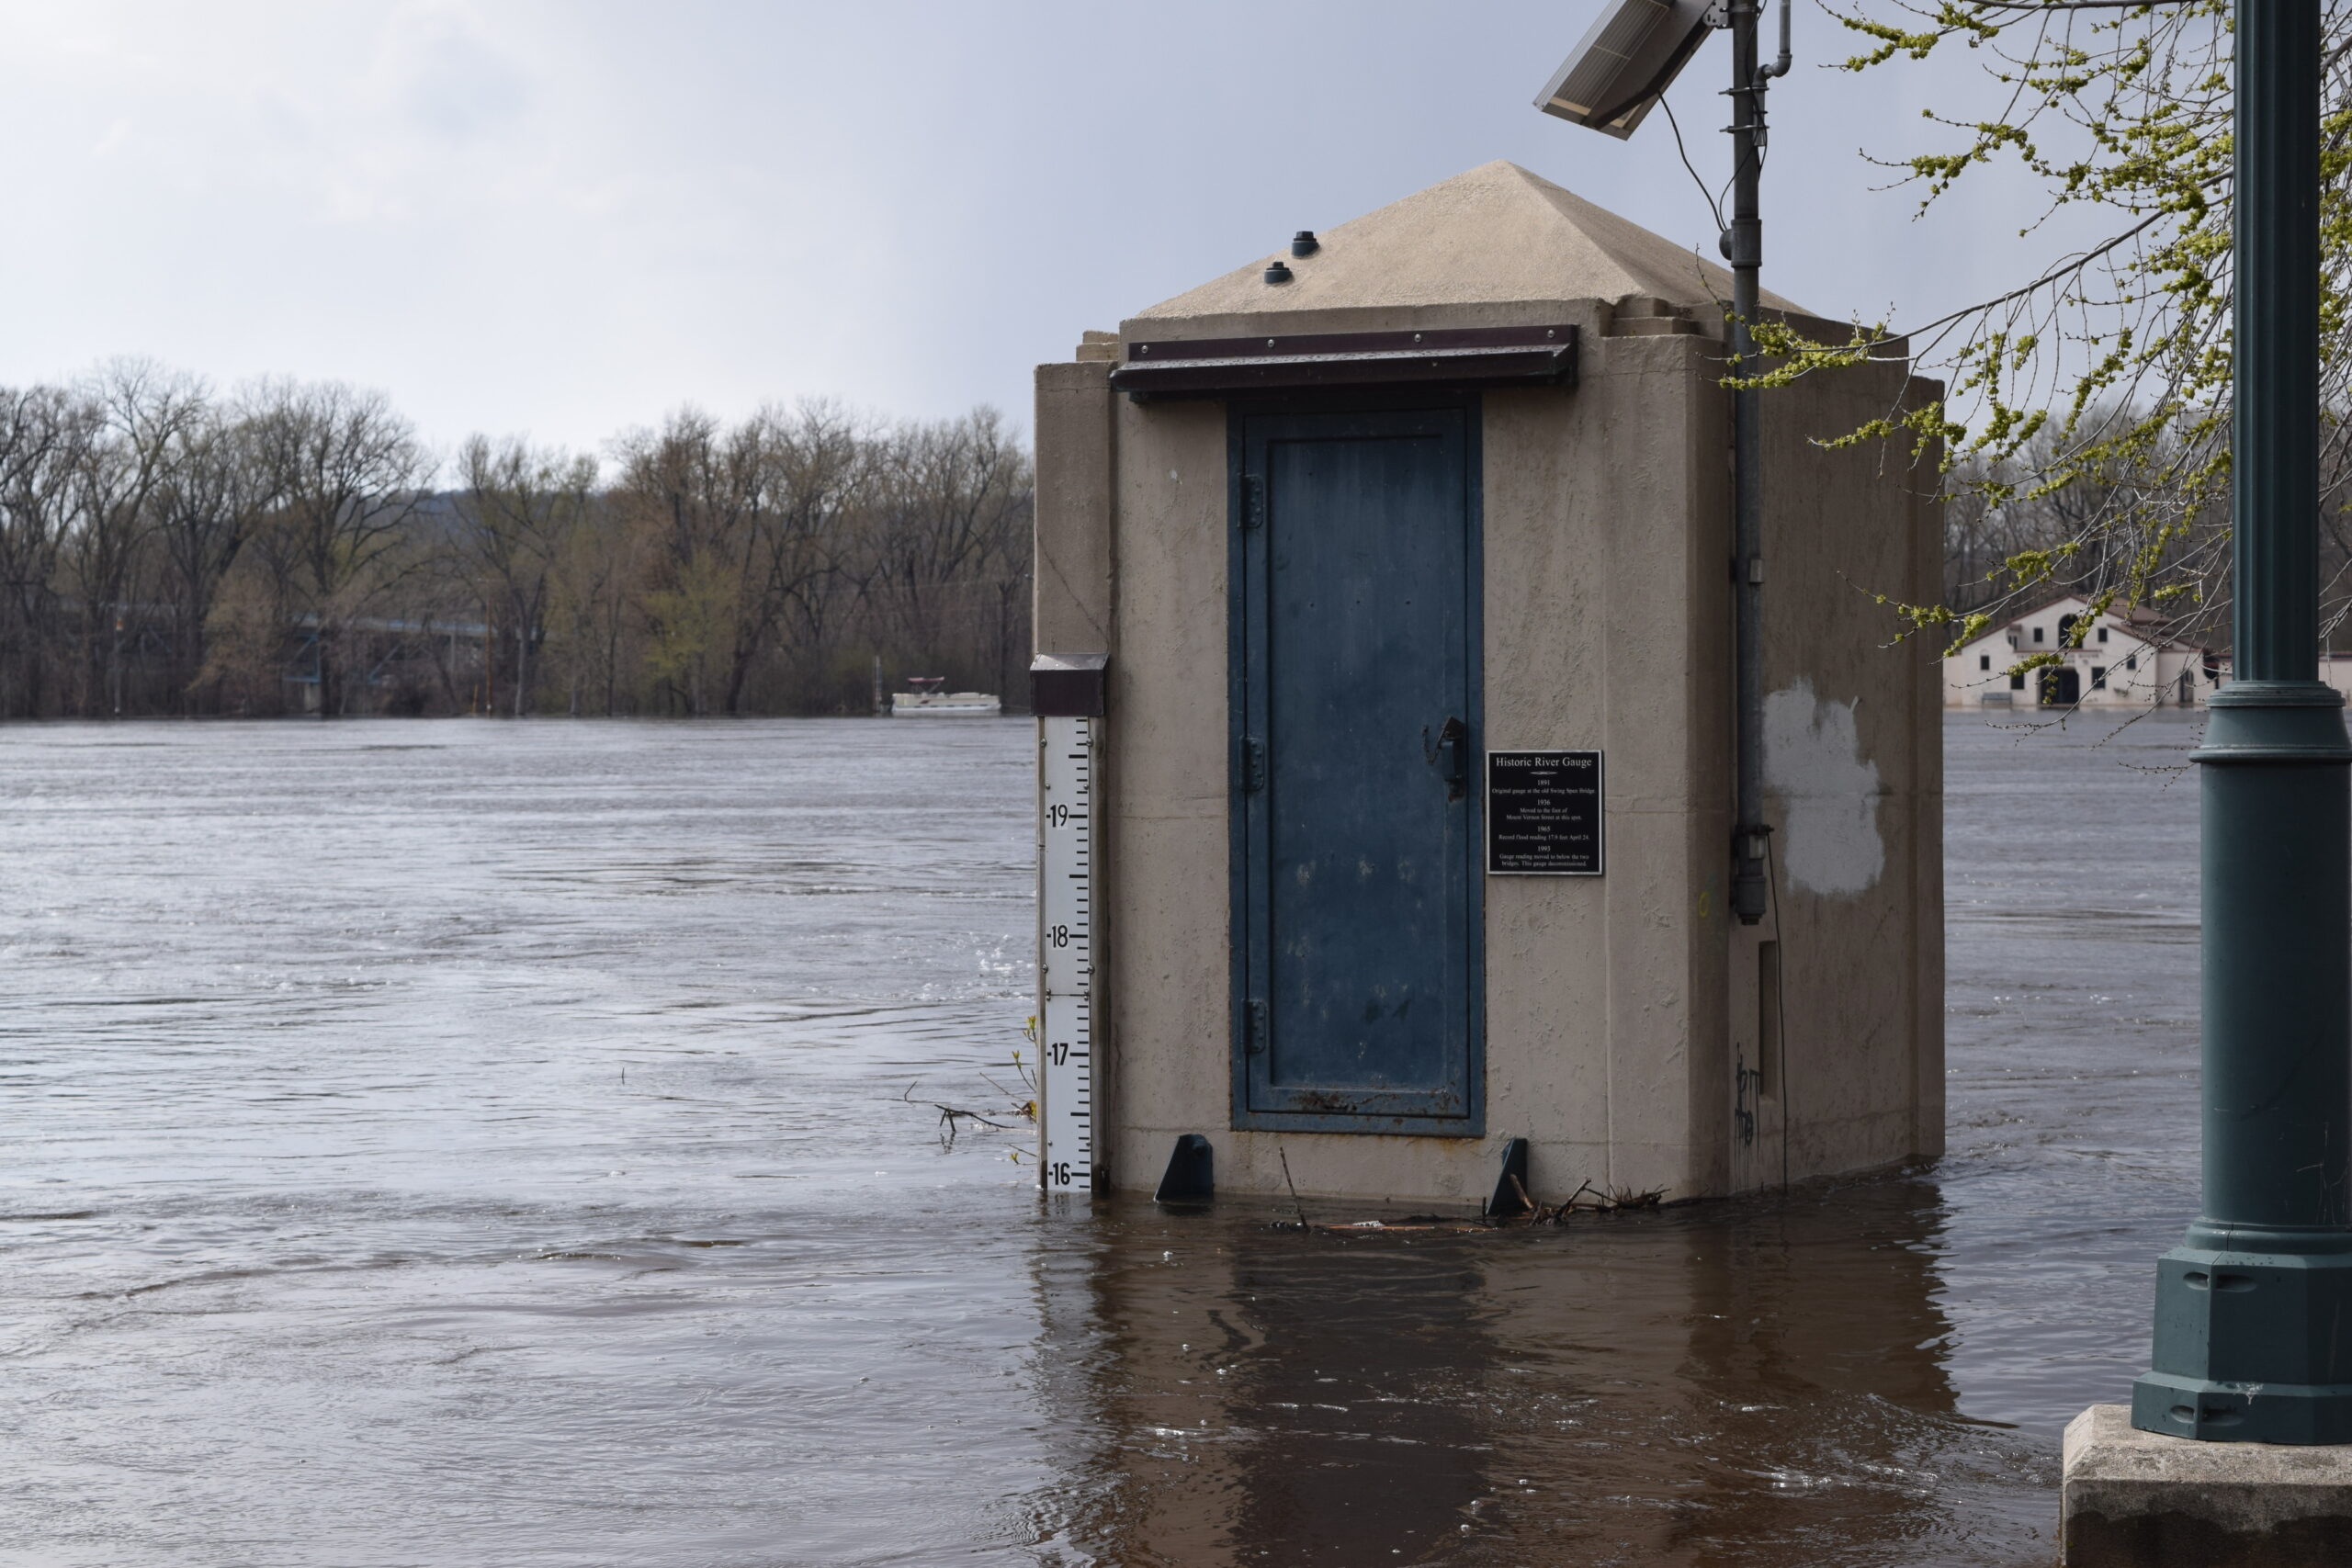 After Mississippi River flooding, Wisconsin mayors look to future, clean up efforts